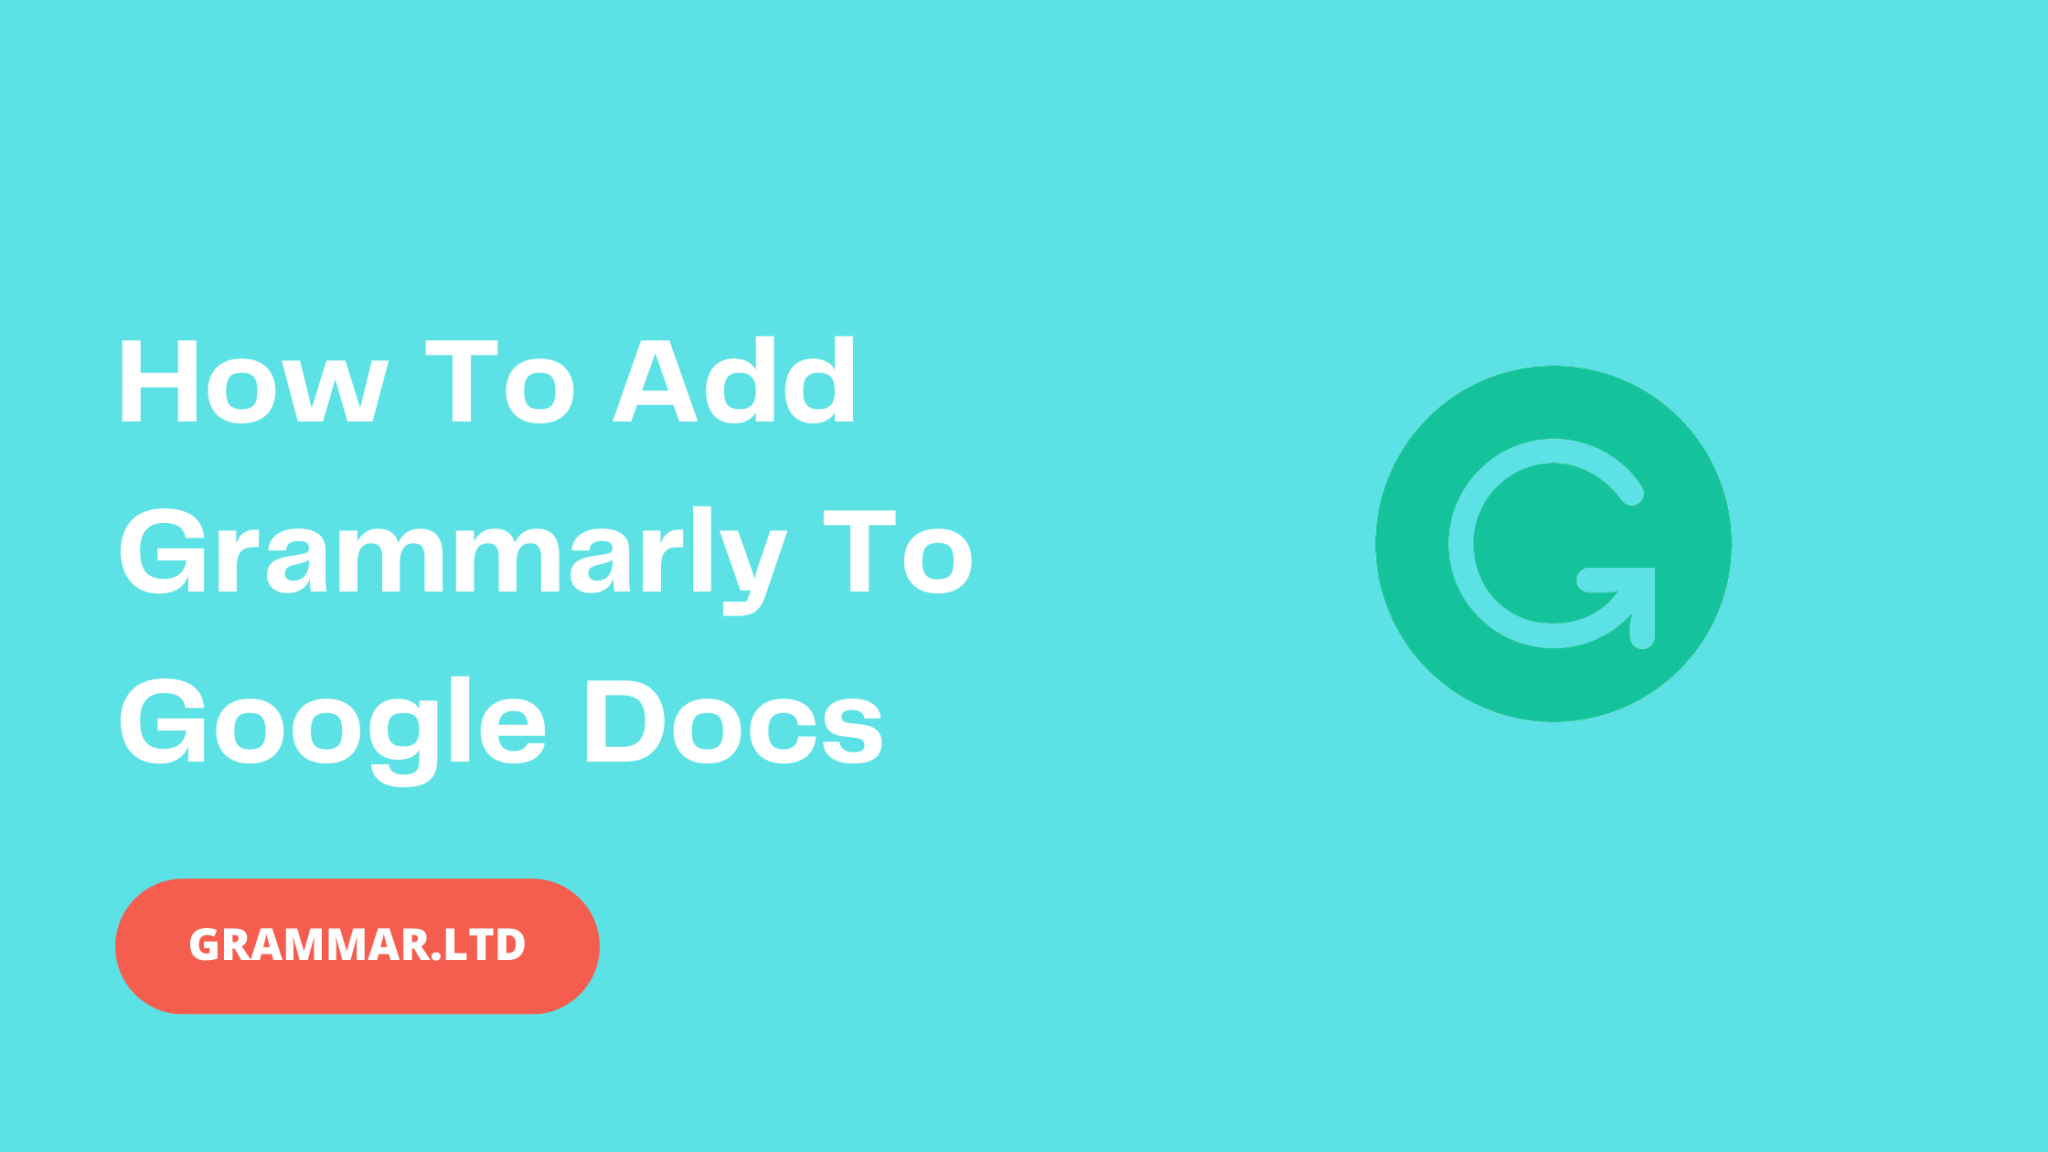 grammarly free for google doce